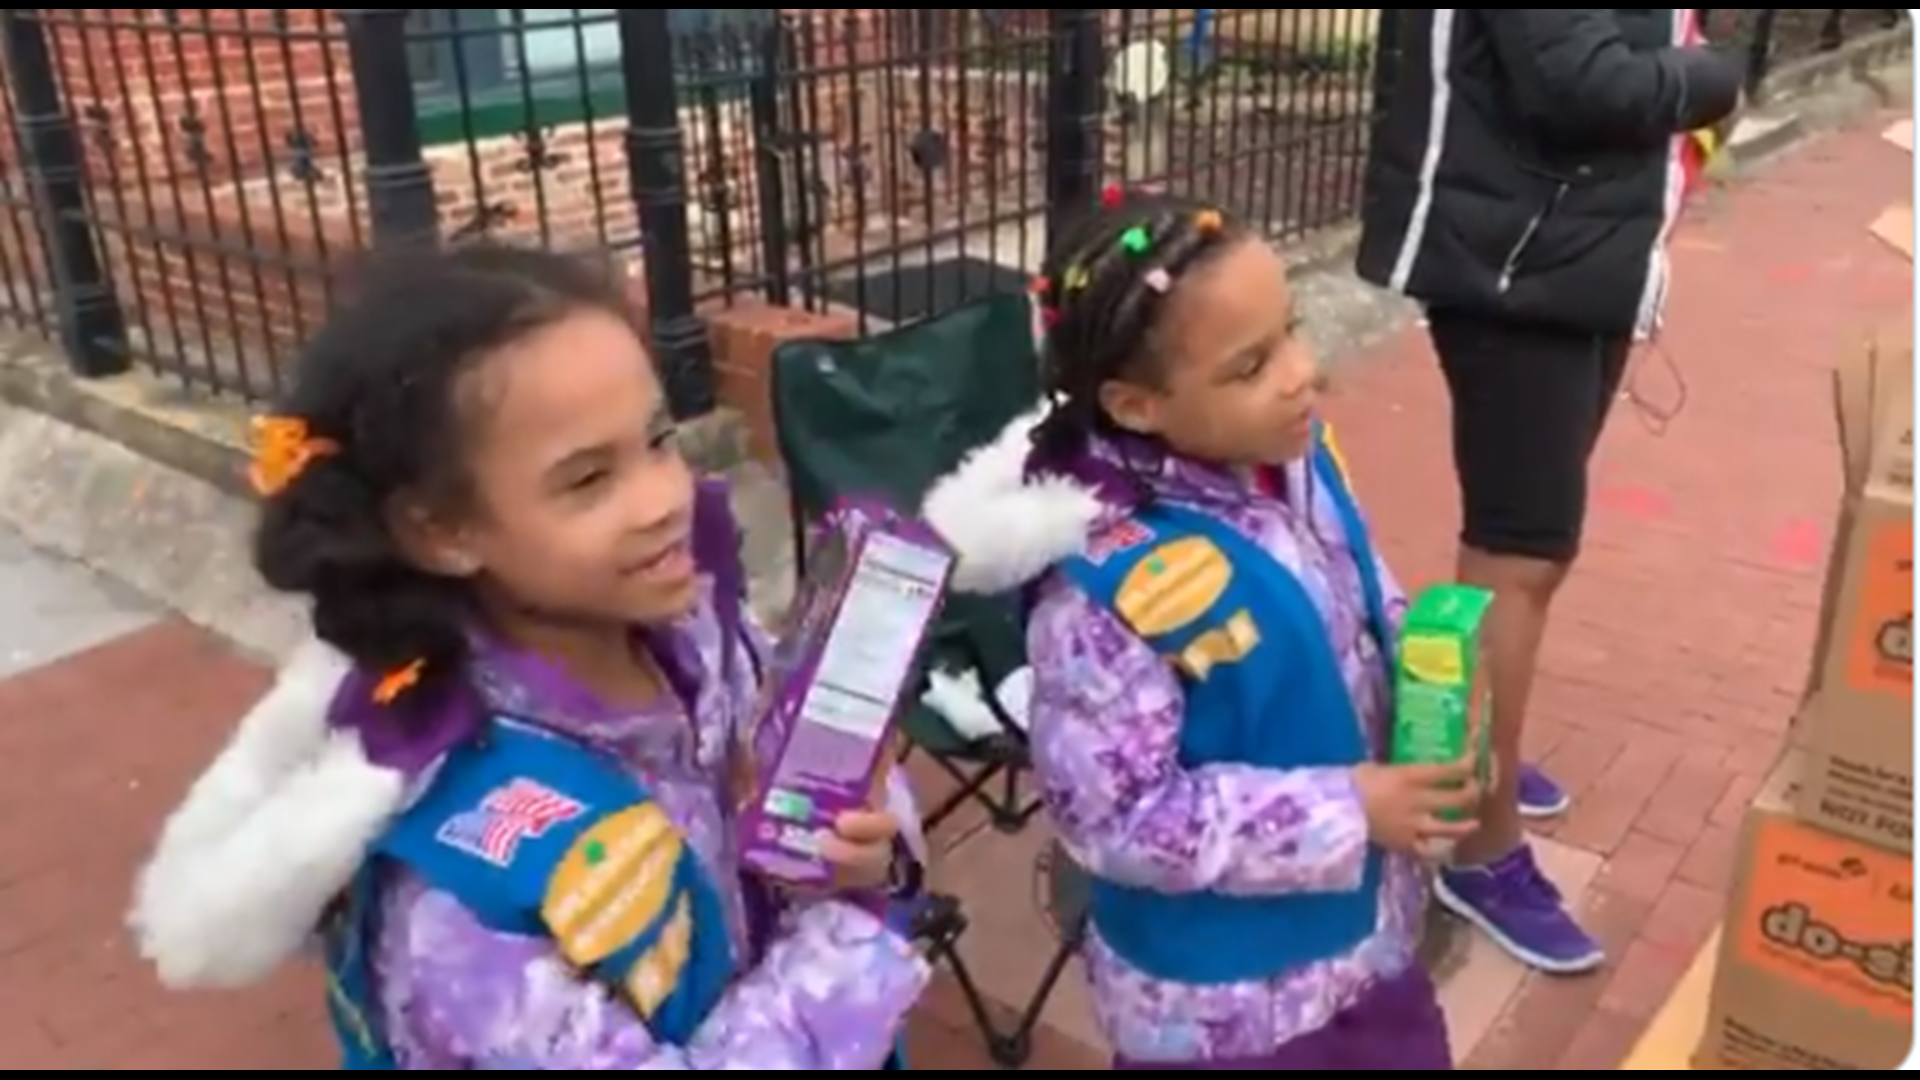 The woman said while her child was selling Girl Scout cookies, the man walked up to the table, grabbed the cash box -- then ran off.